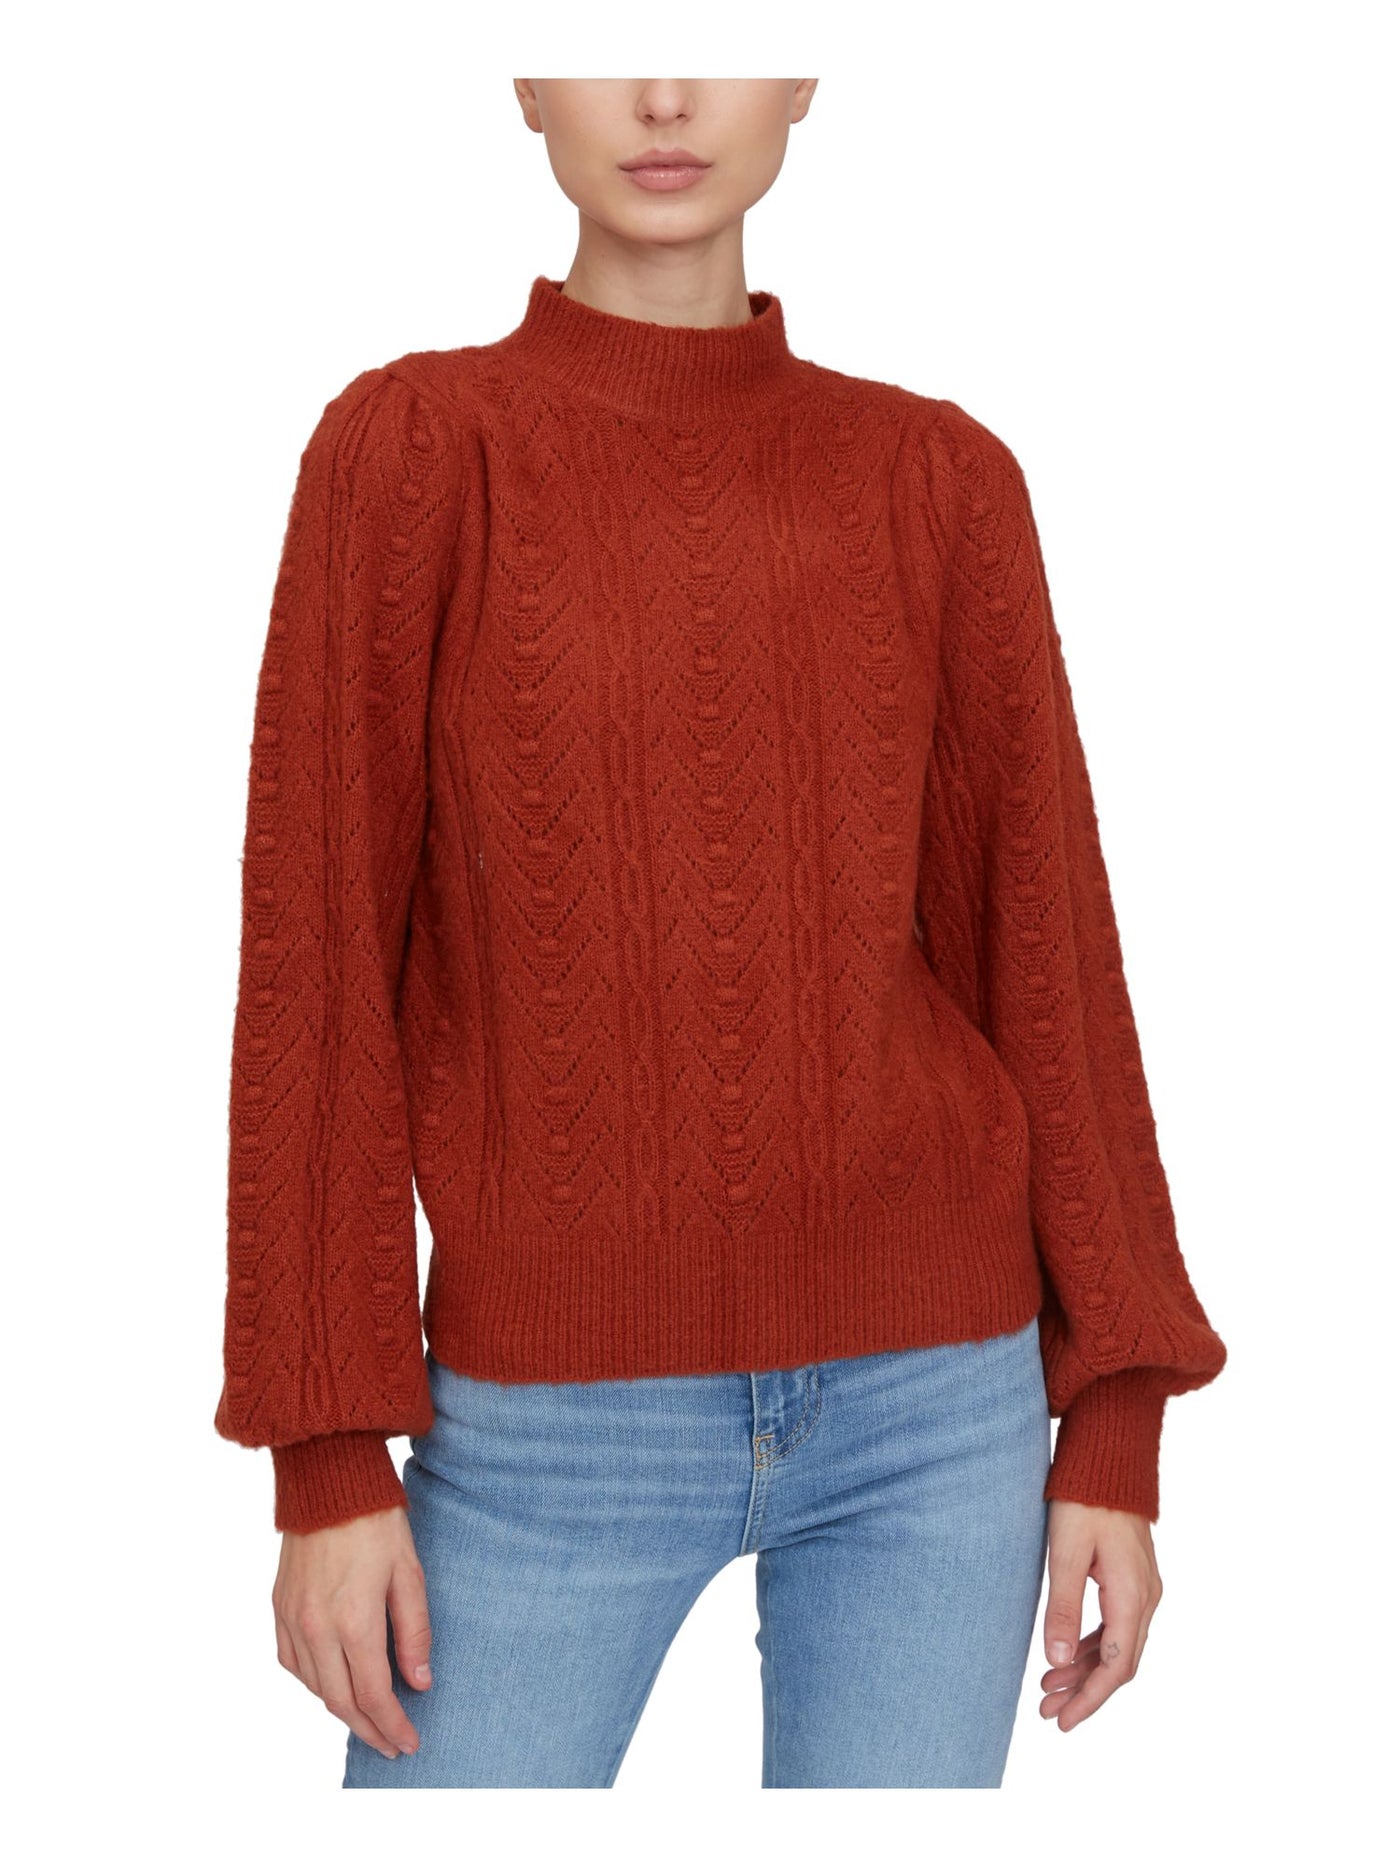 LUCY PARIS Womens Orange Stretch Textured Ribbed Balloon Sleeve Mock Neck Sweater XS